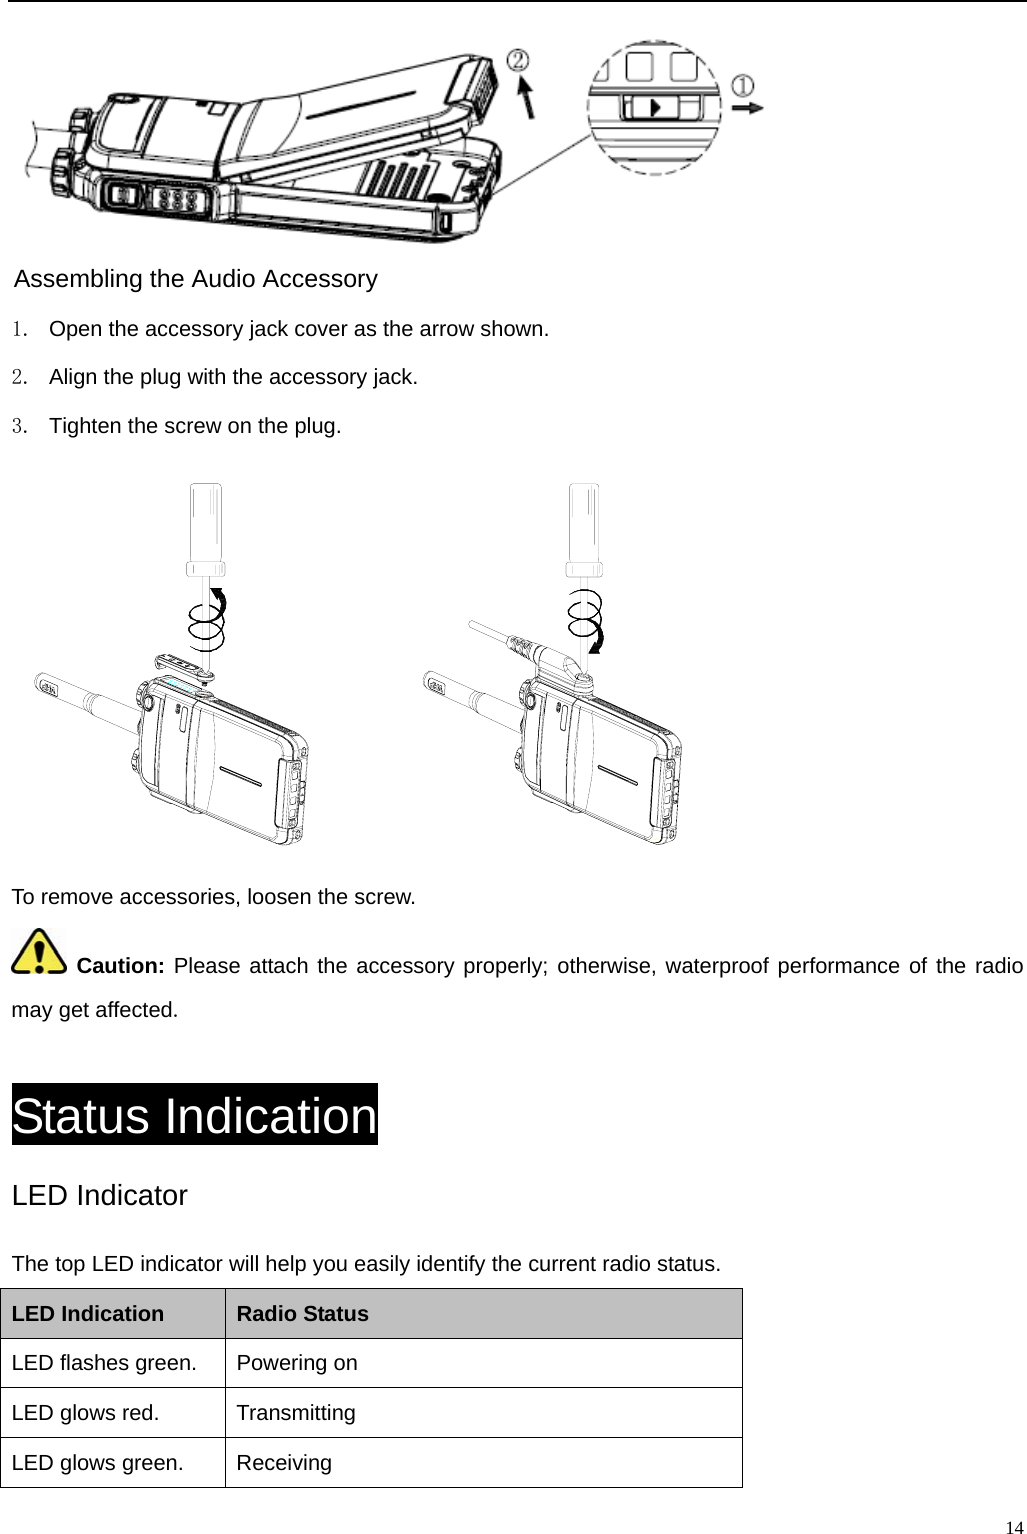                                                                                                              14  Assembling the Audio Accessory 1.  Open the accessory jack cover as the arrow shown.   2.  Align the plug with the accessory jack.   3.  Tighten the screw on the plug.        To remove accessories, loosen the screw.    Caution: Please attach the accessory properly; otherwise, waterproof performance of the radio may get affected.   Status Indication LED Indicator The top LED indicator will help you easily identify the current radio status.   LED Indication Radio Status LED flashes green. Powering on LED glows red. Transmitting LED glows green. Receiving 